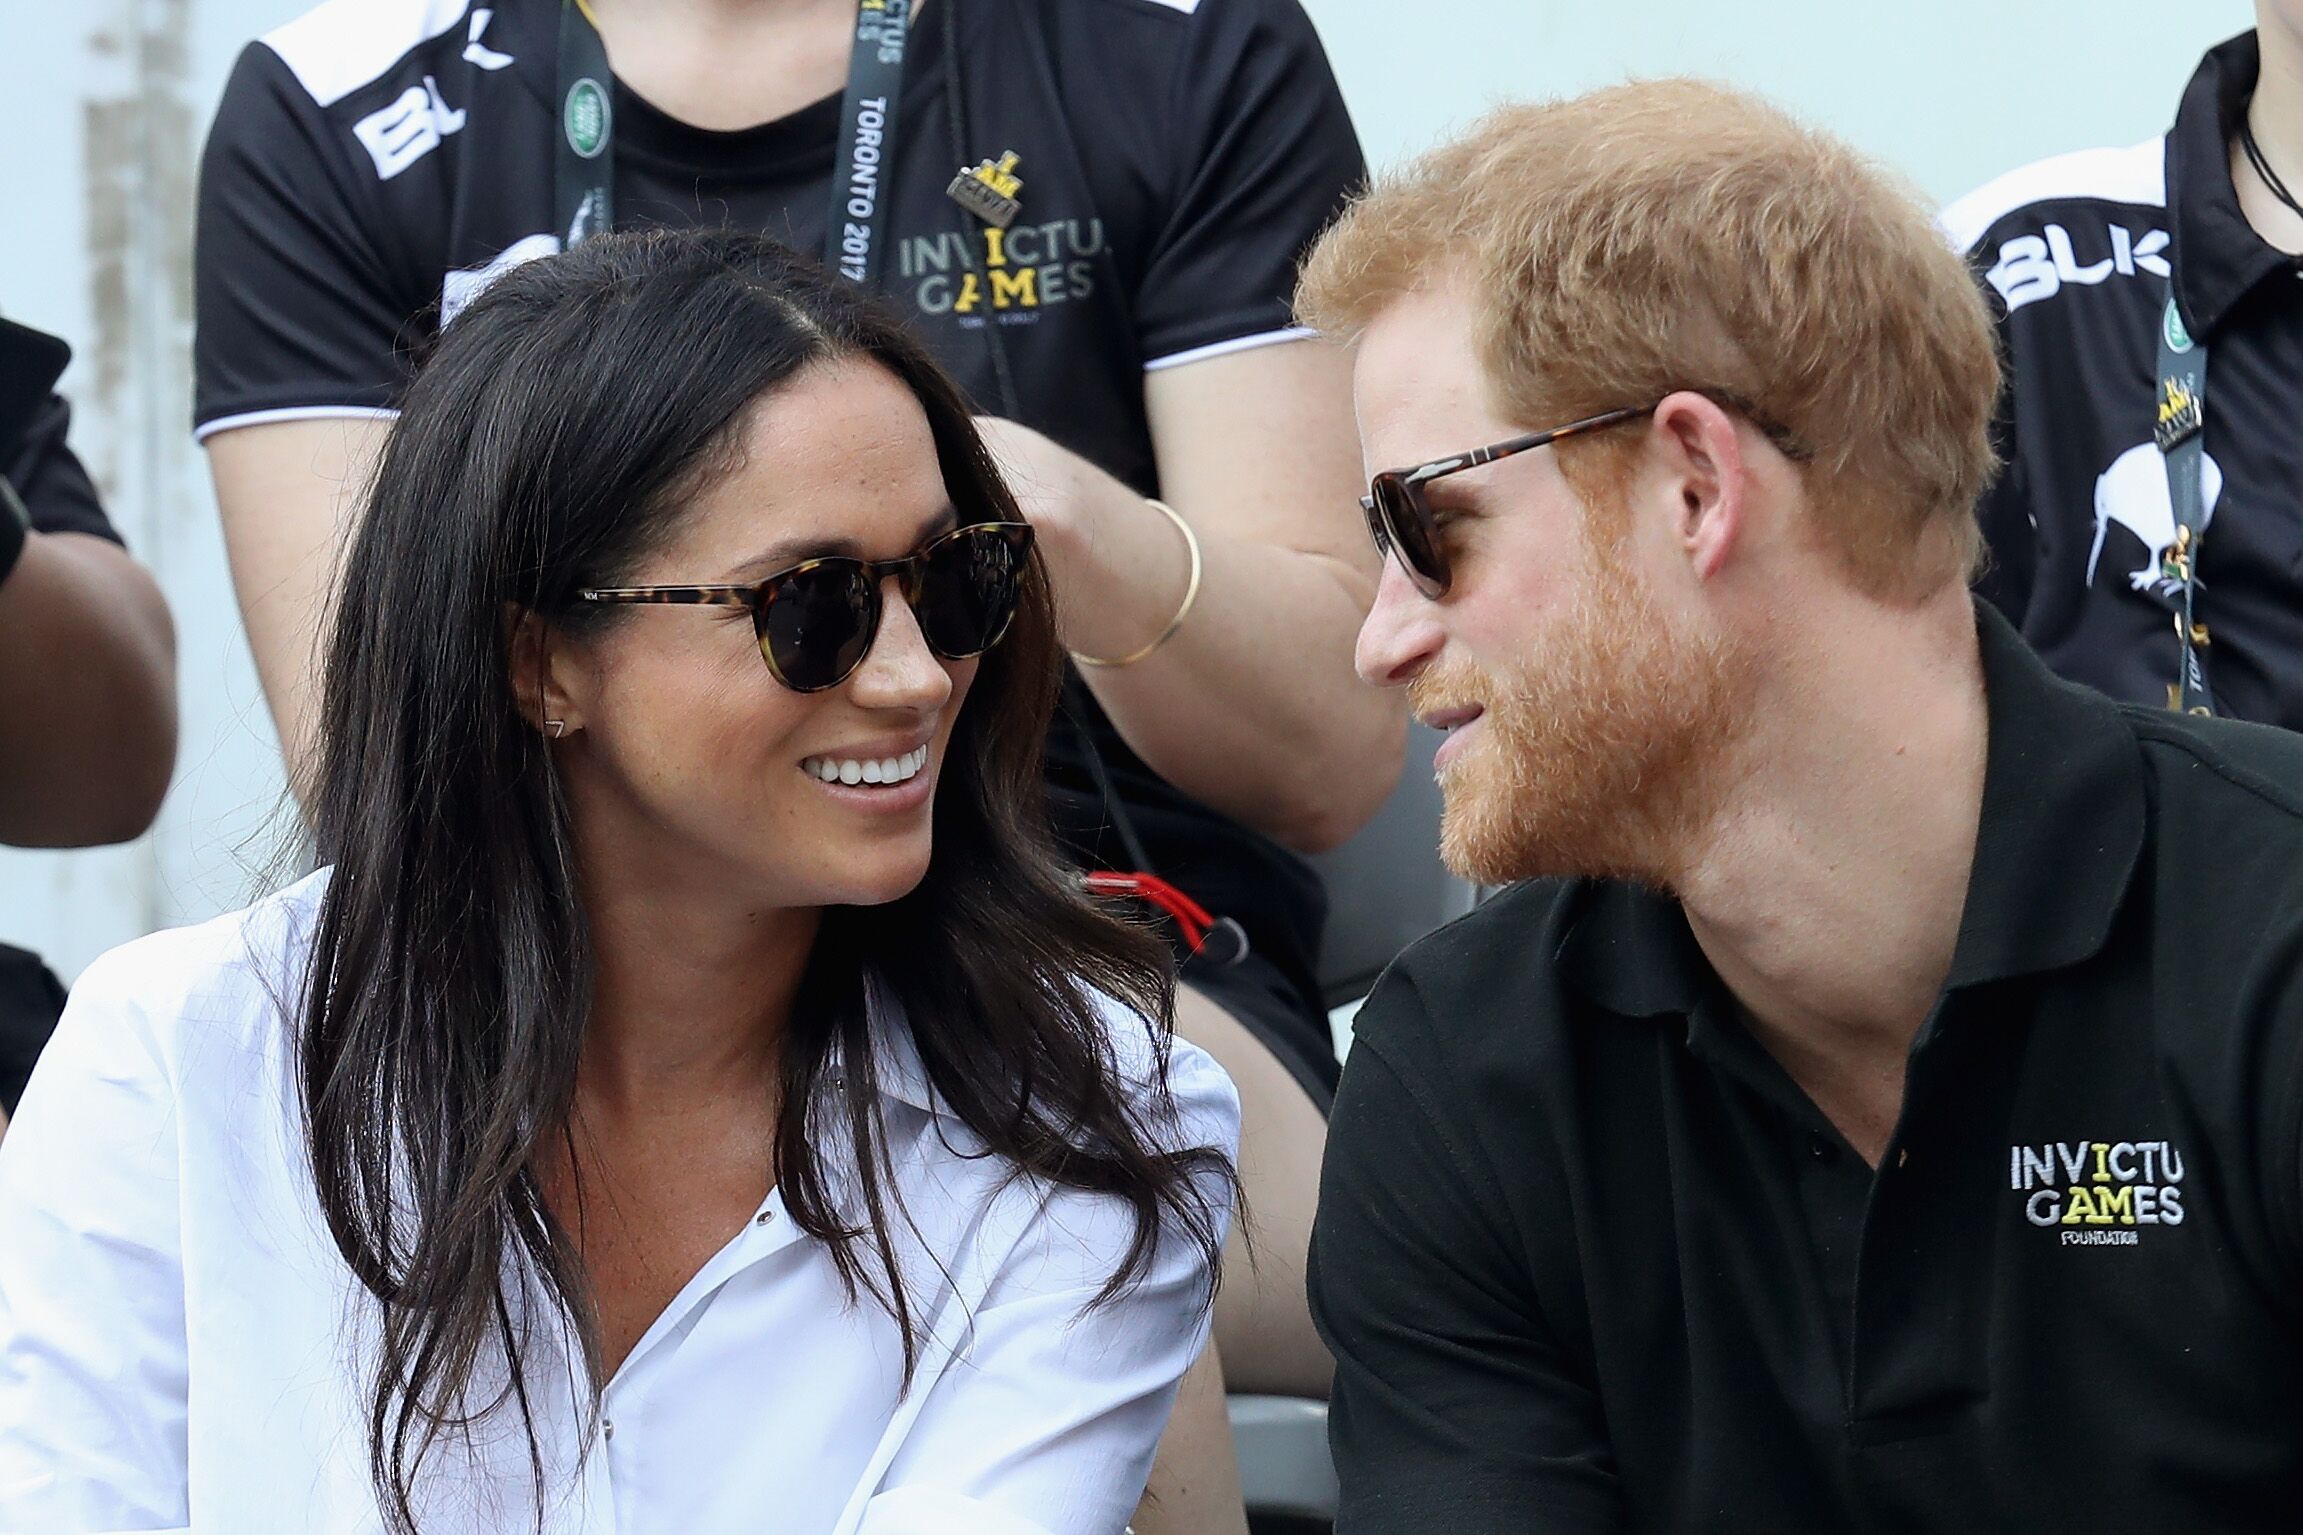 Prince Harry and Meghan Markle at a Wheelchair Tennis match during the Invictus Games on September 25, 2017, in Toronto | Source: Getty Images